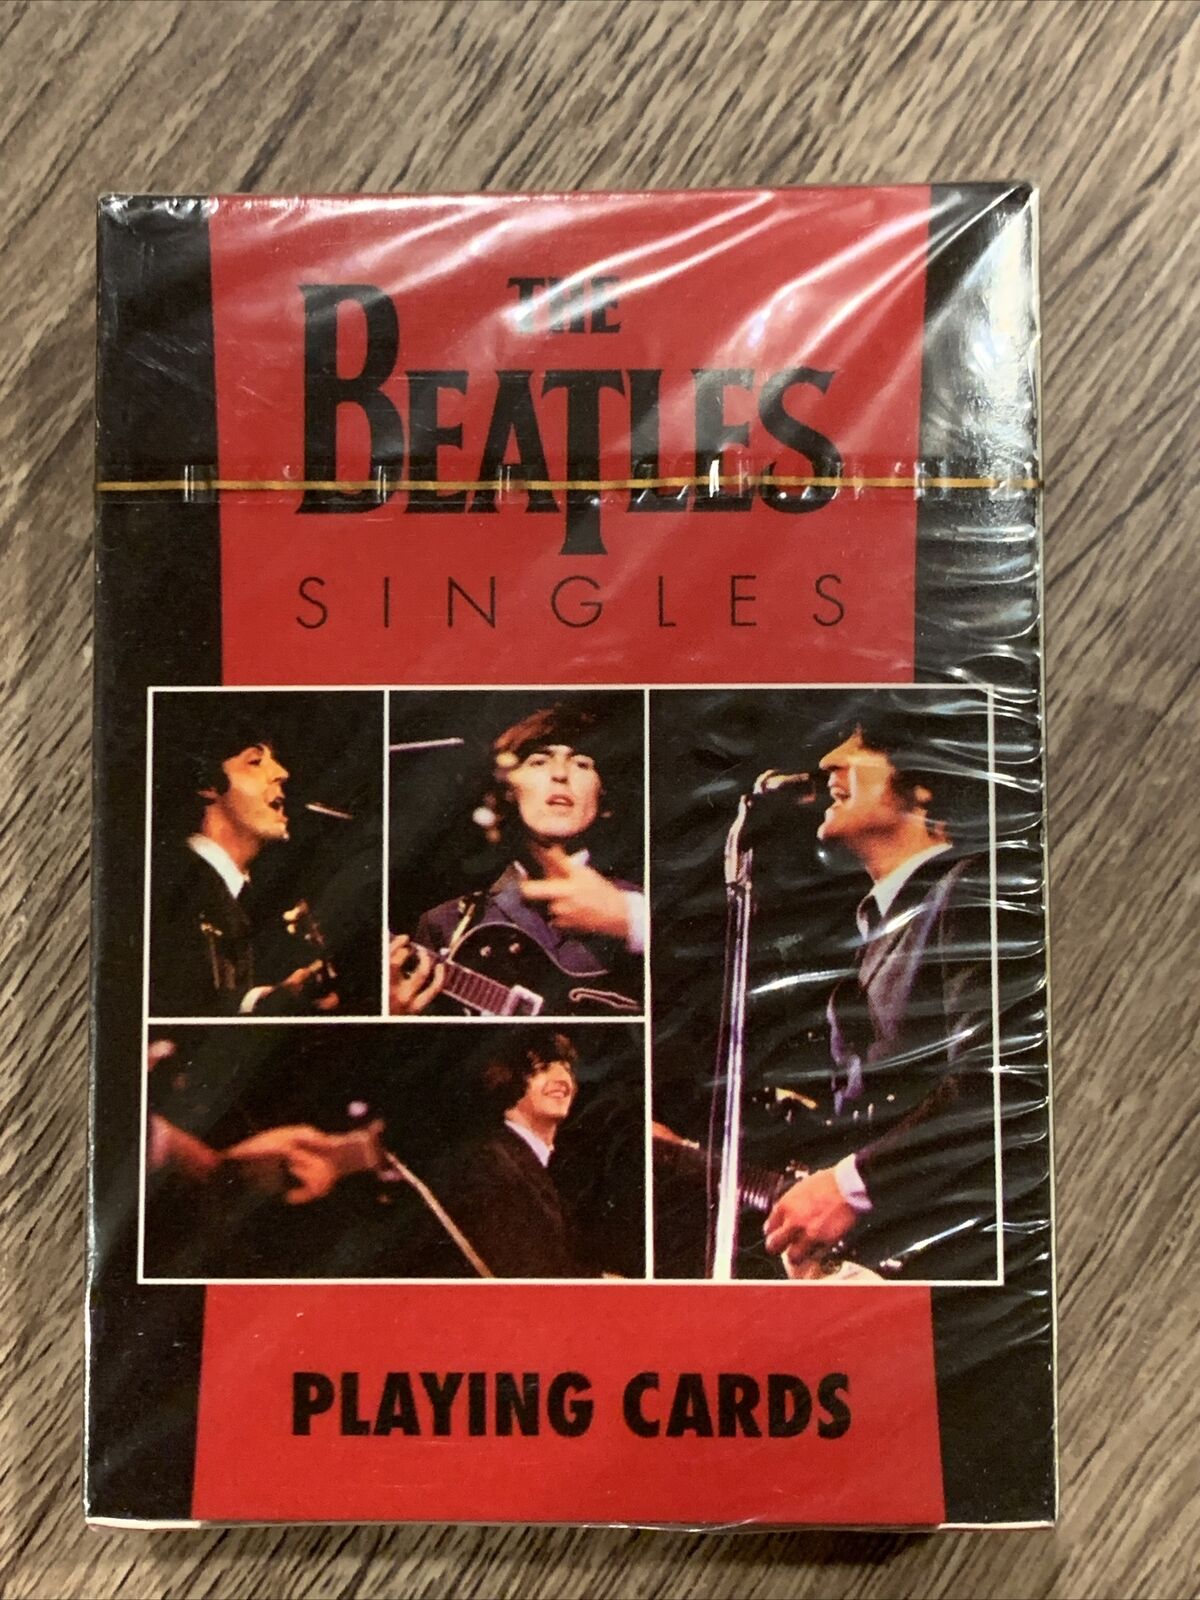 NEW THE BEATLES PLAYING CARDS Sealed